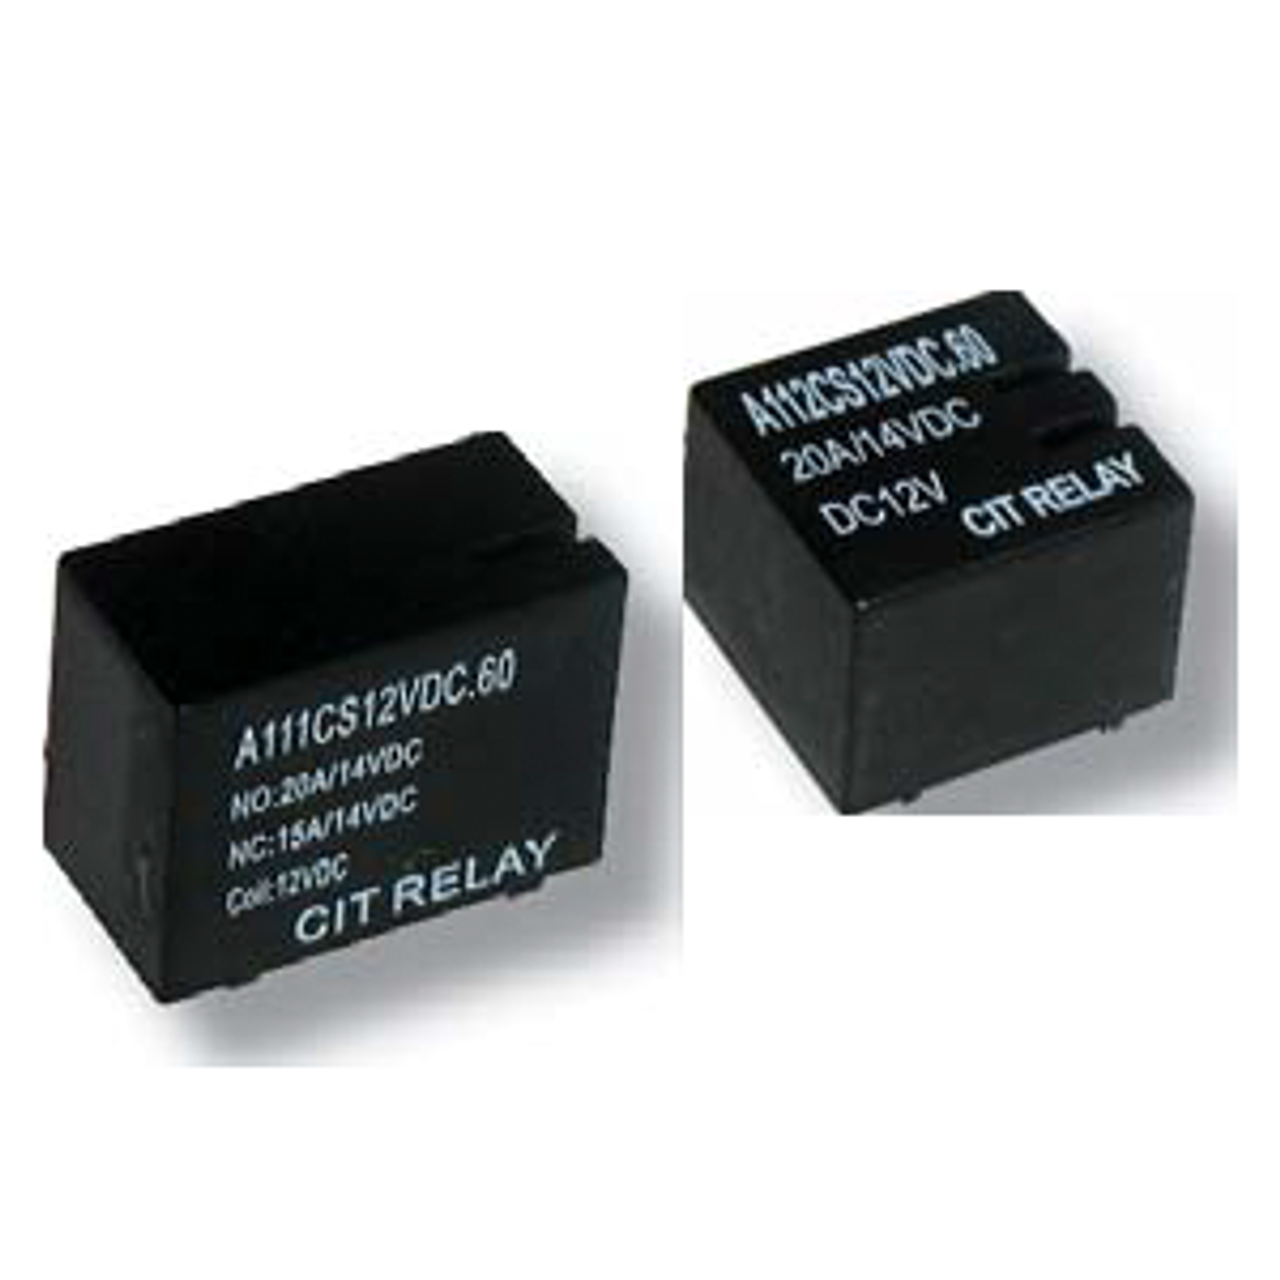 CIT Relay and Switch A112CS12VDC.80 Automotive Relays